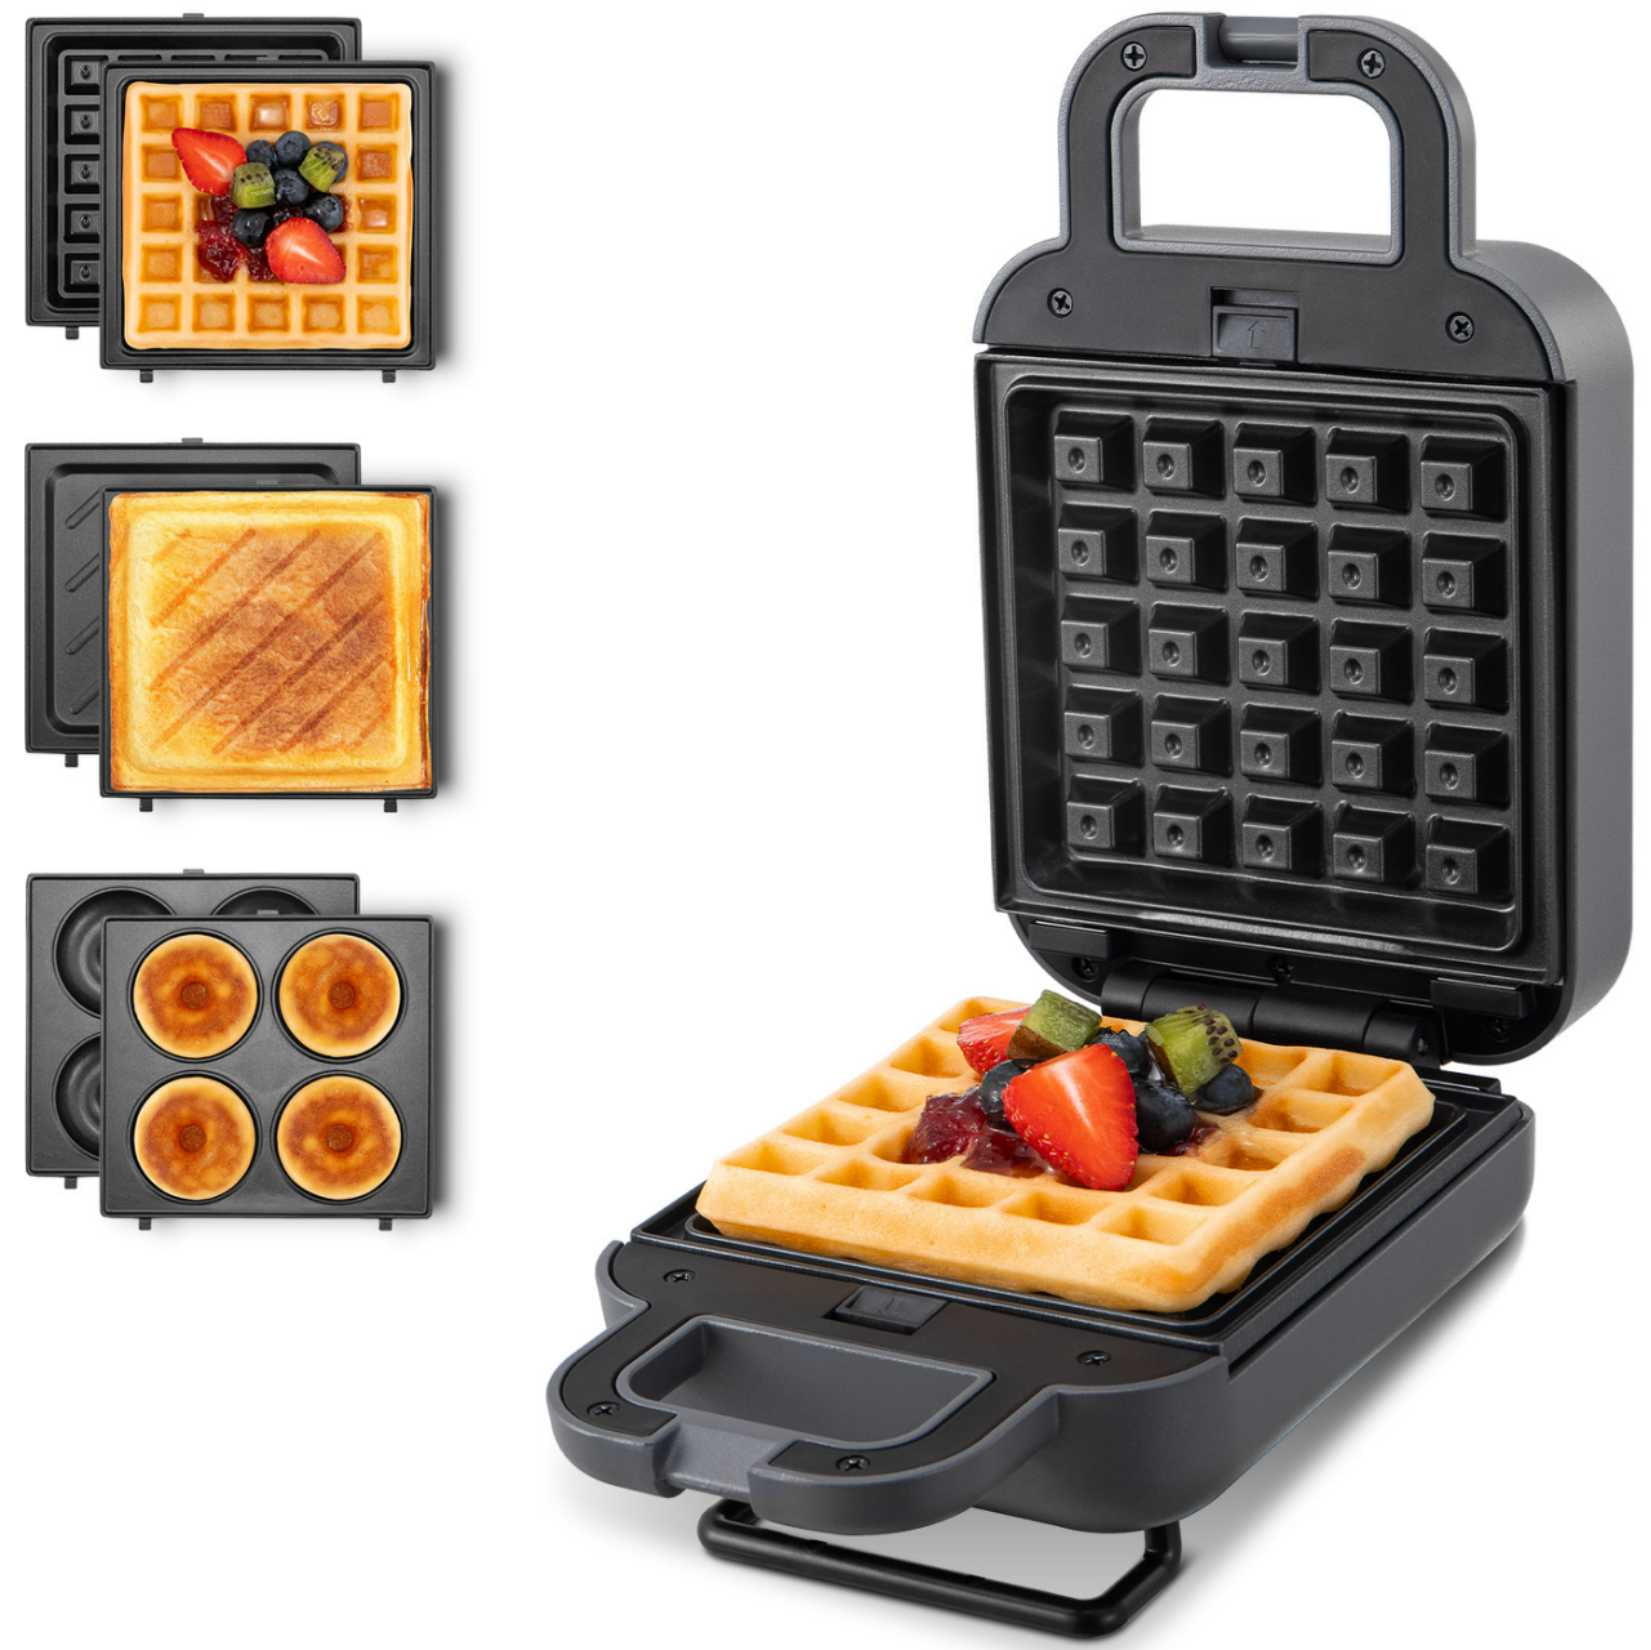  FineMade Double Mini Waffle Maker with 4 Inch Dual Non